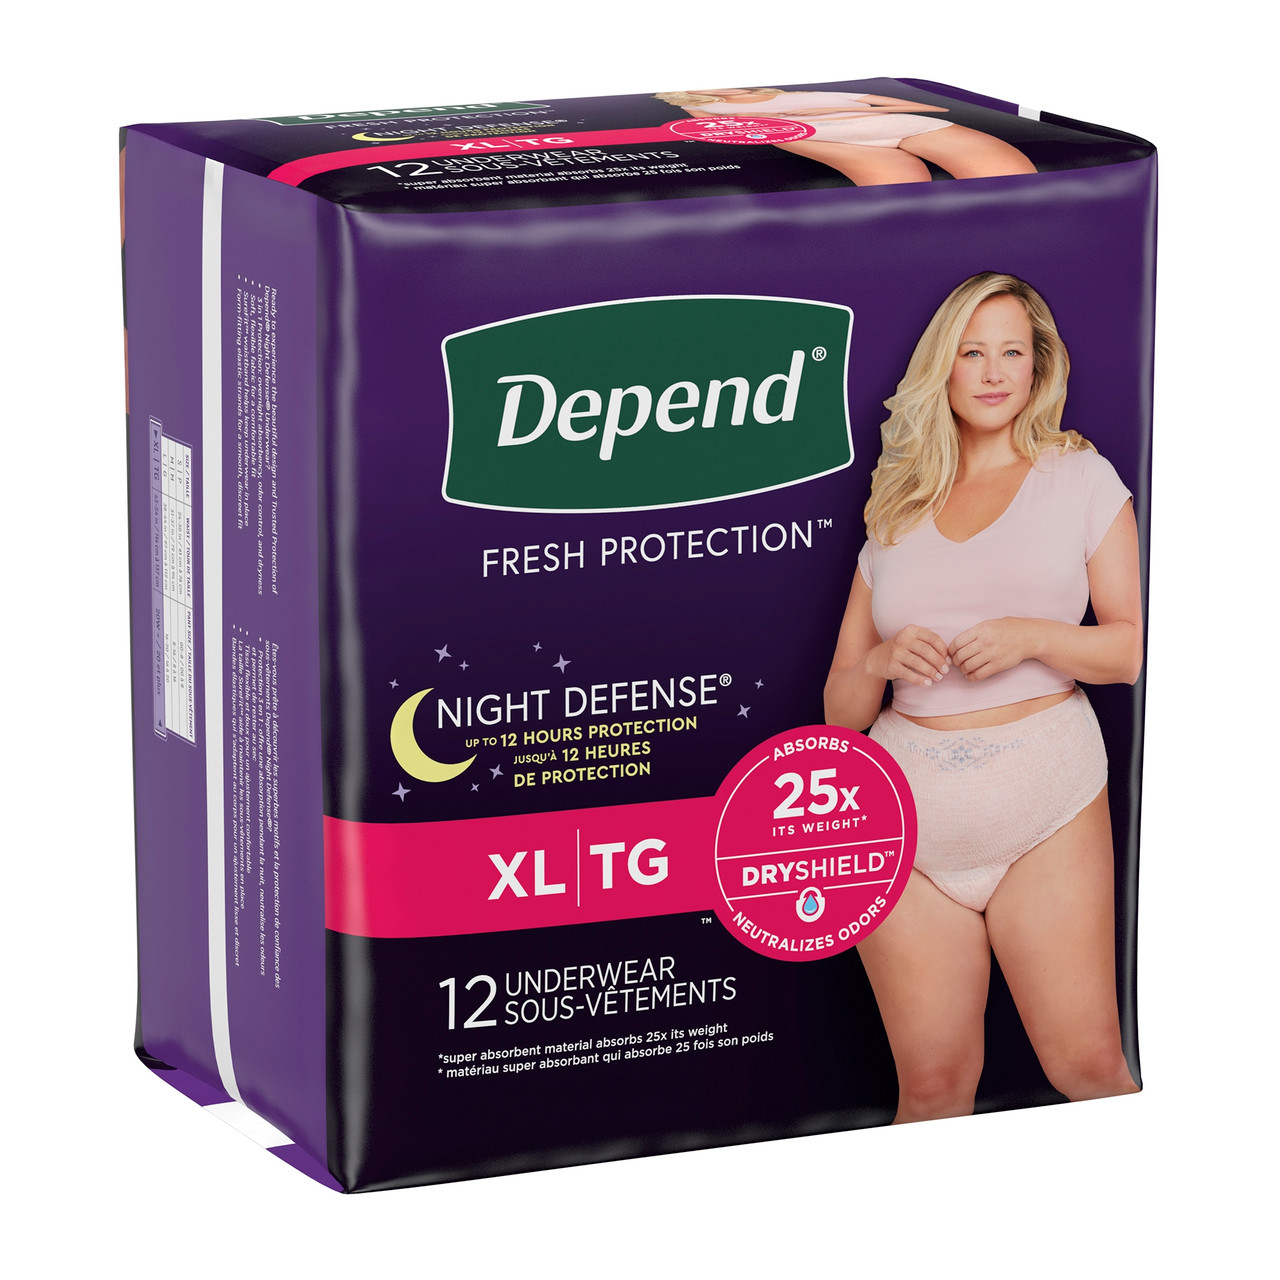 Buy from Trusted Stores Offering Big Size Underwear in Attractive